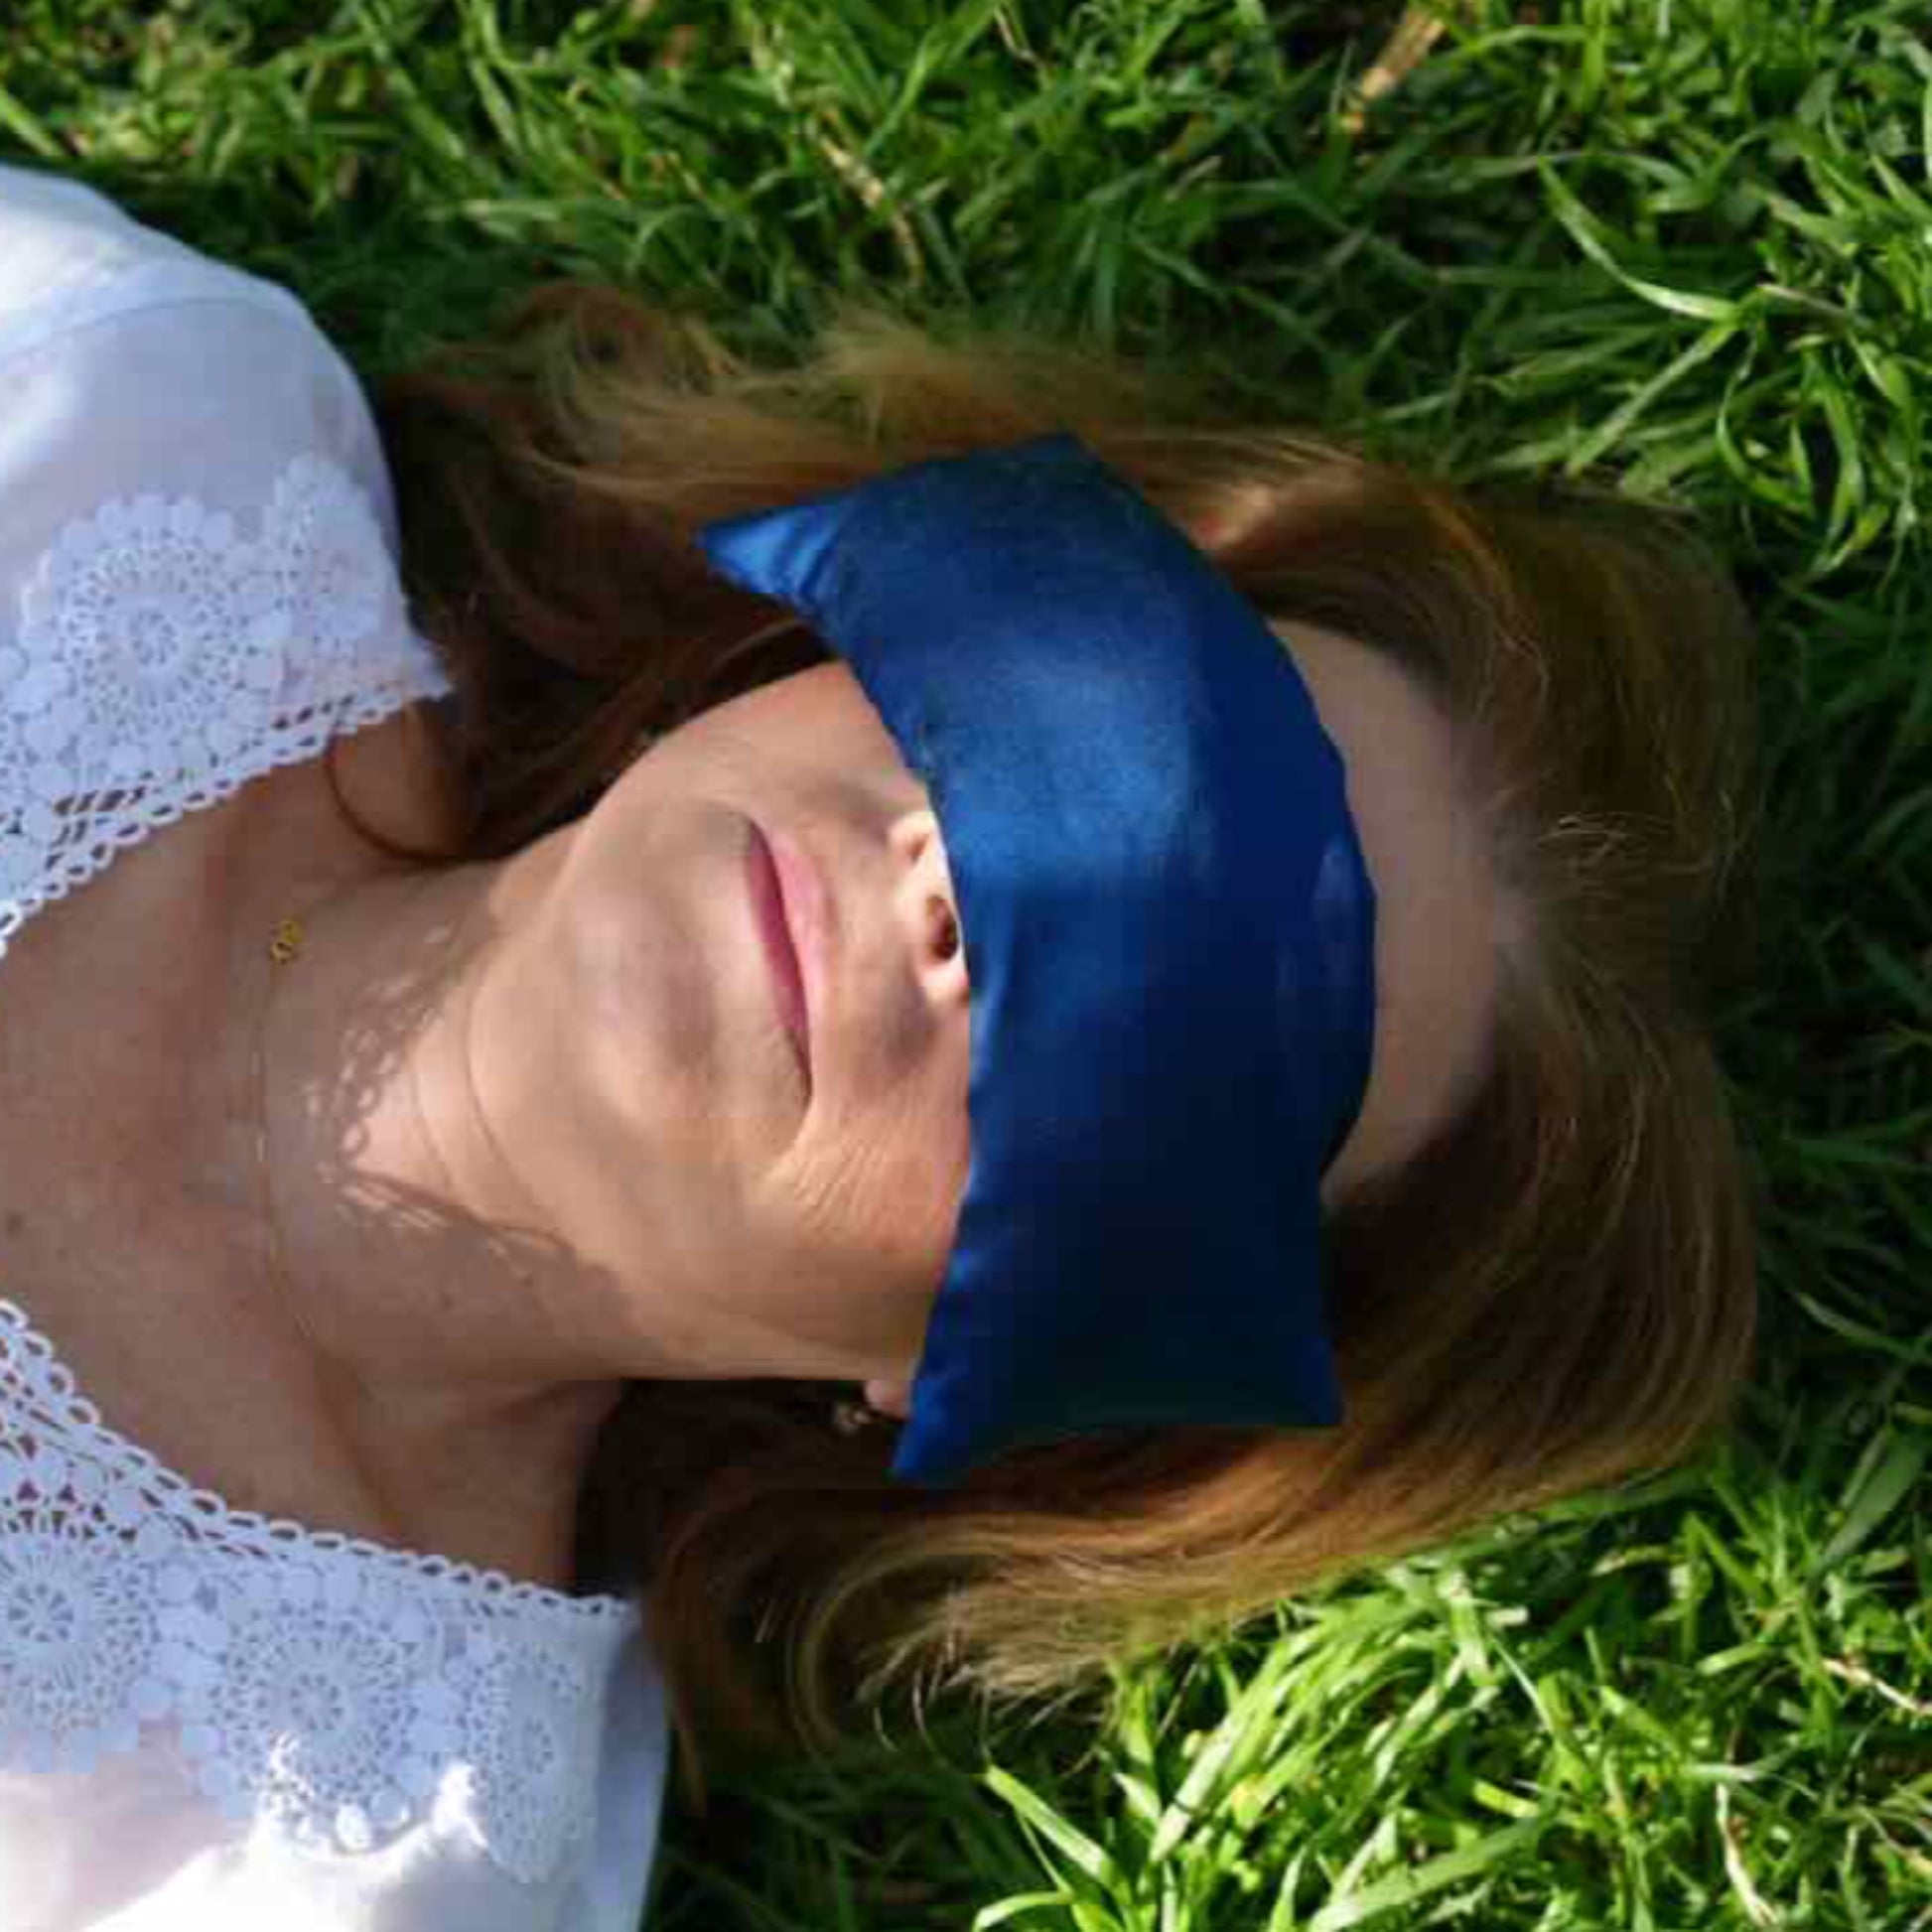 Louise with blue silk eye pillow covering eyes